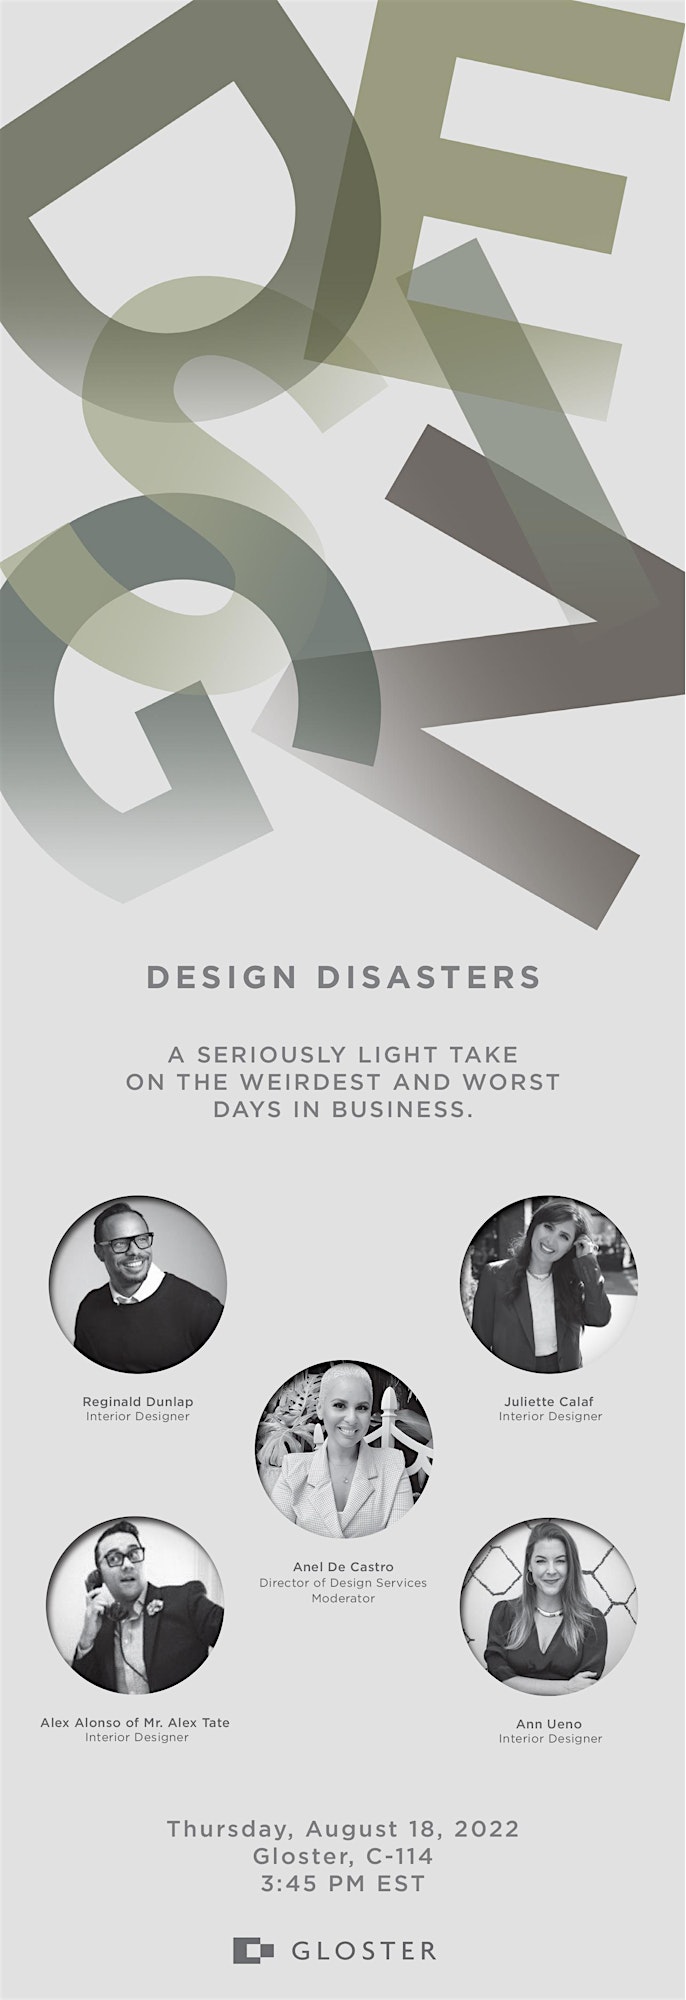 Design Disasters with Gloster image